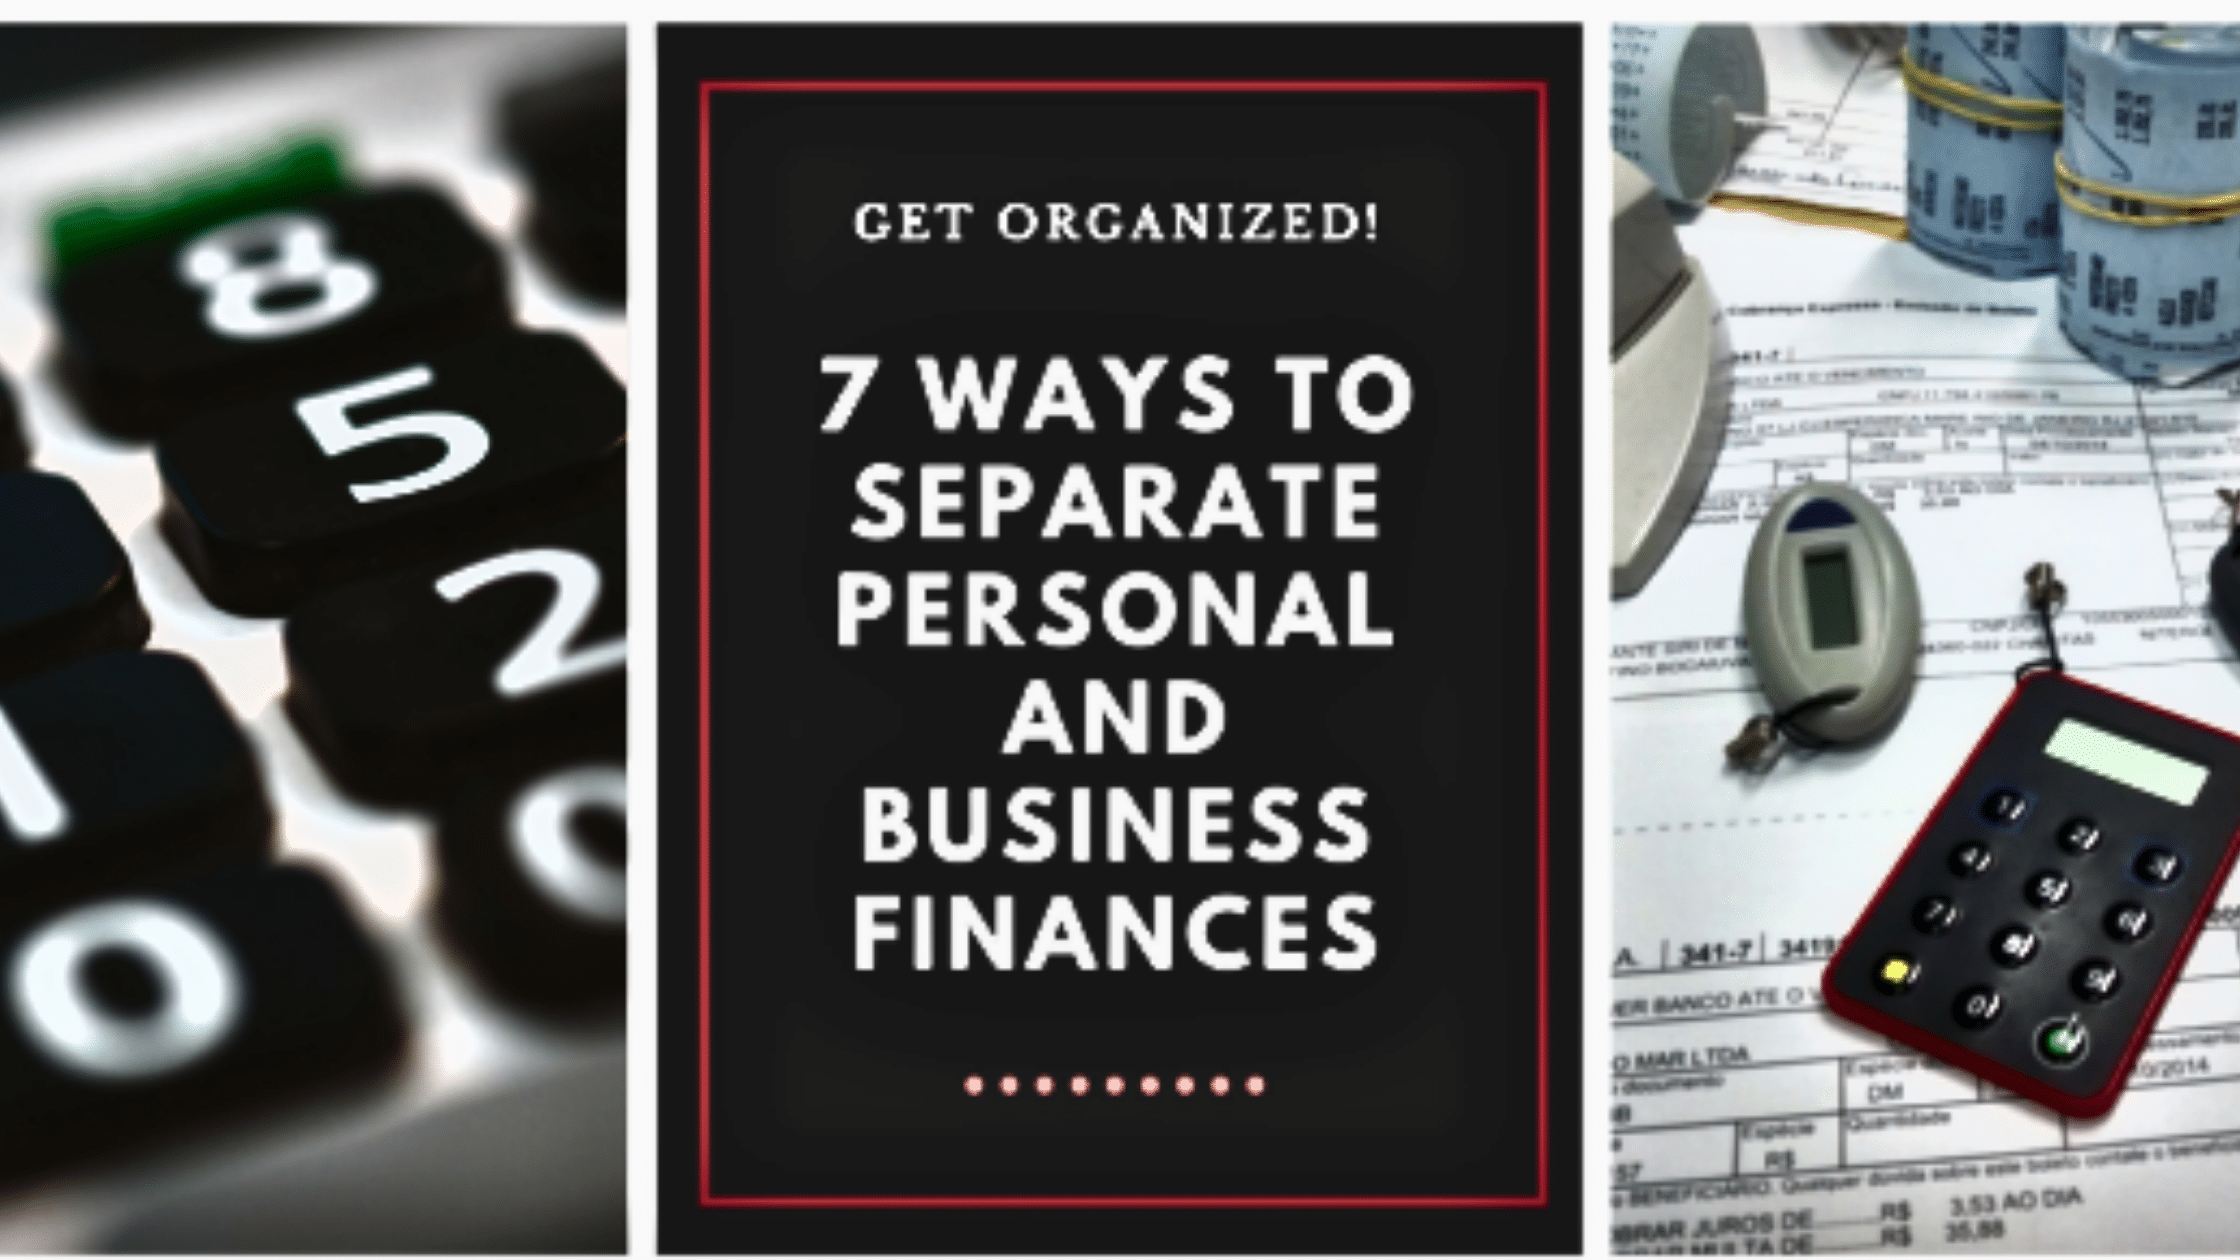 Get Organized! 7 Ways to Separate Personal & Business Finances